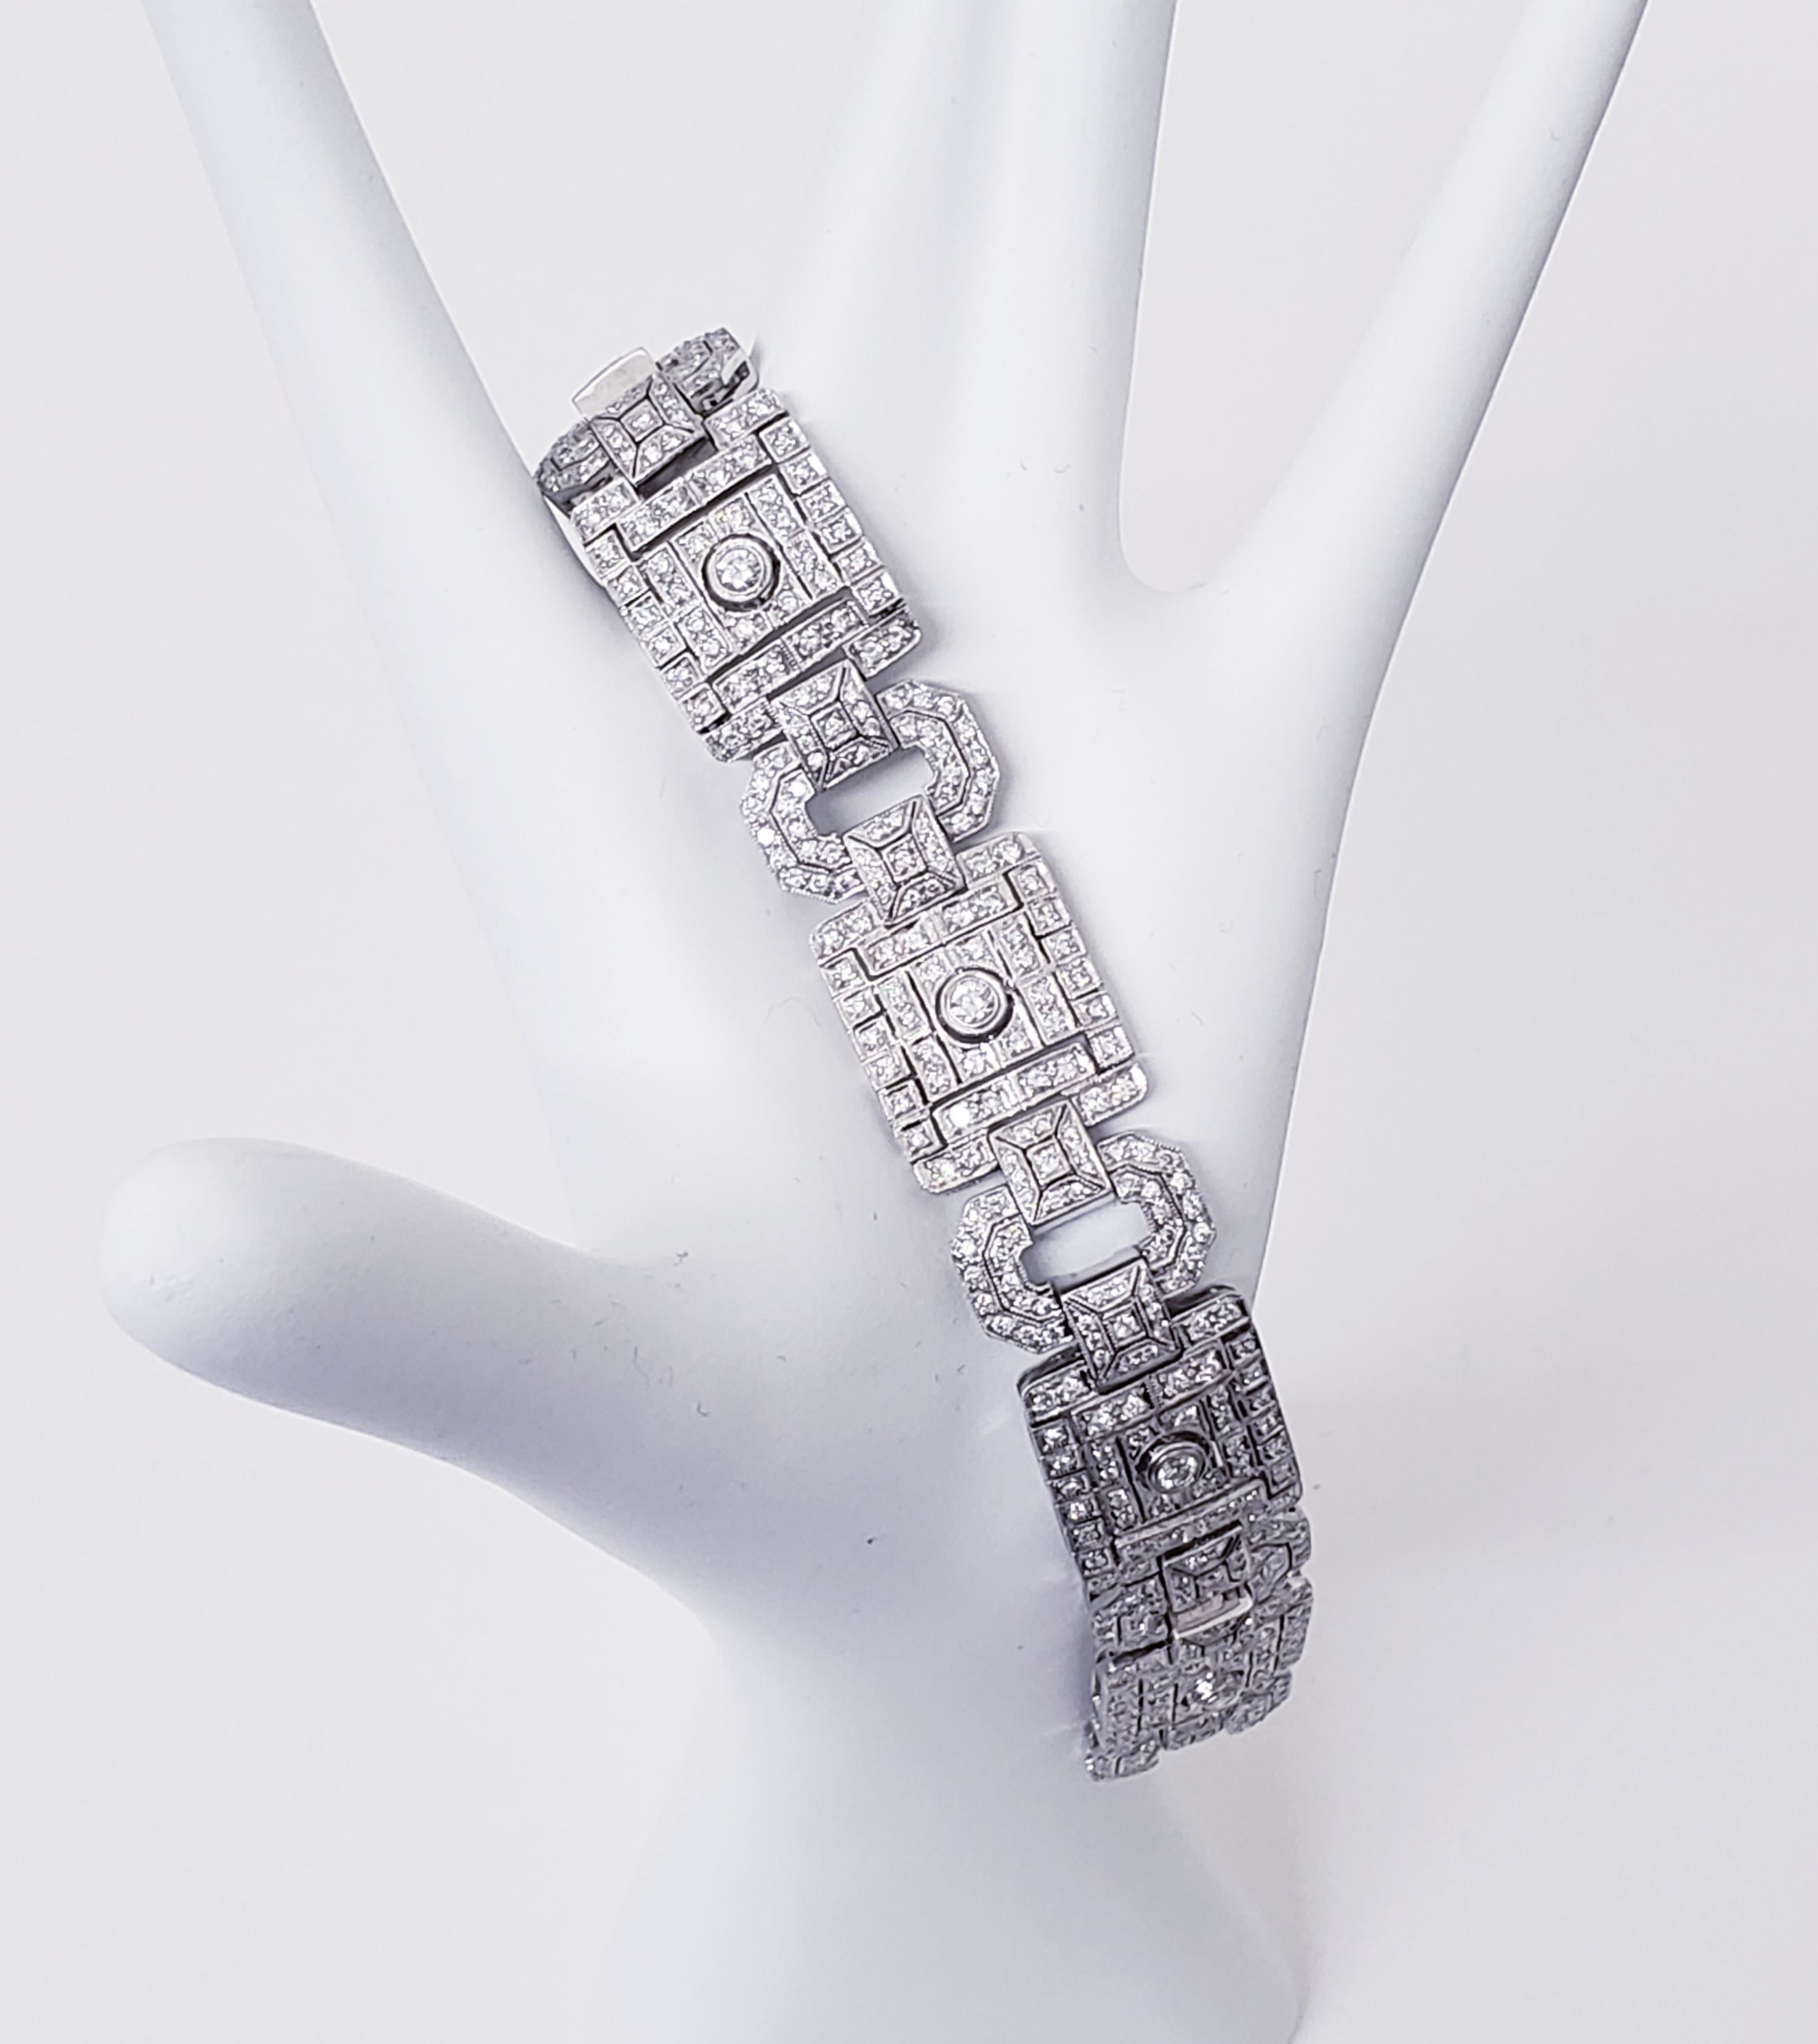 Art Deco diamond bracelet in 18k white gold featuring 10.00TCW 
This is one of the most incredible art deco designs around. 